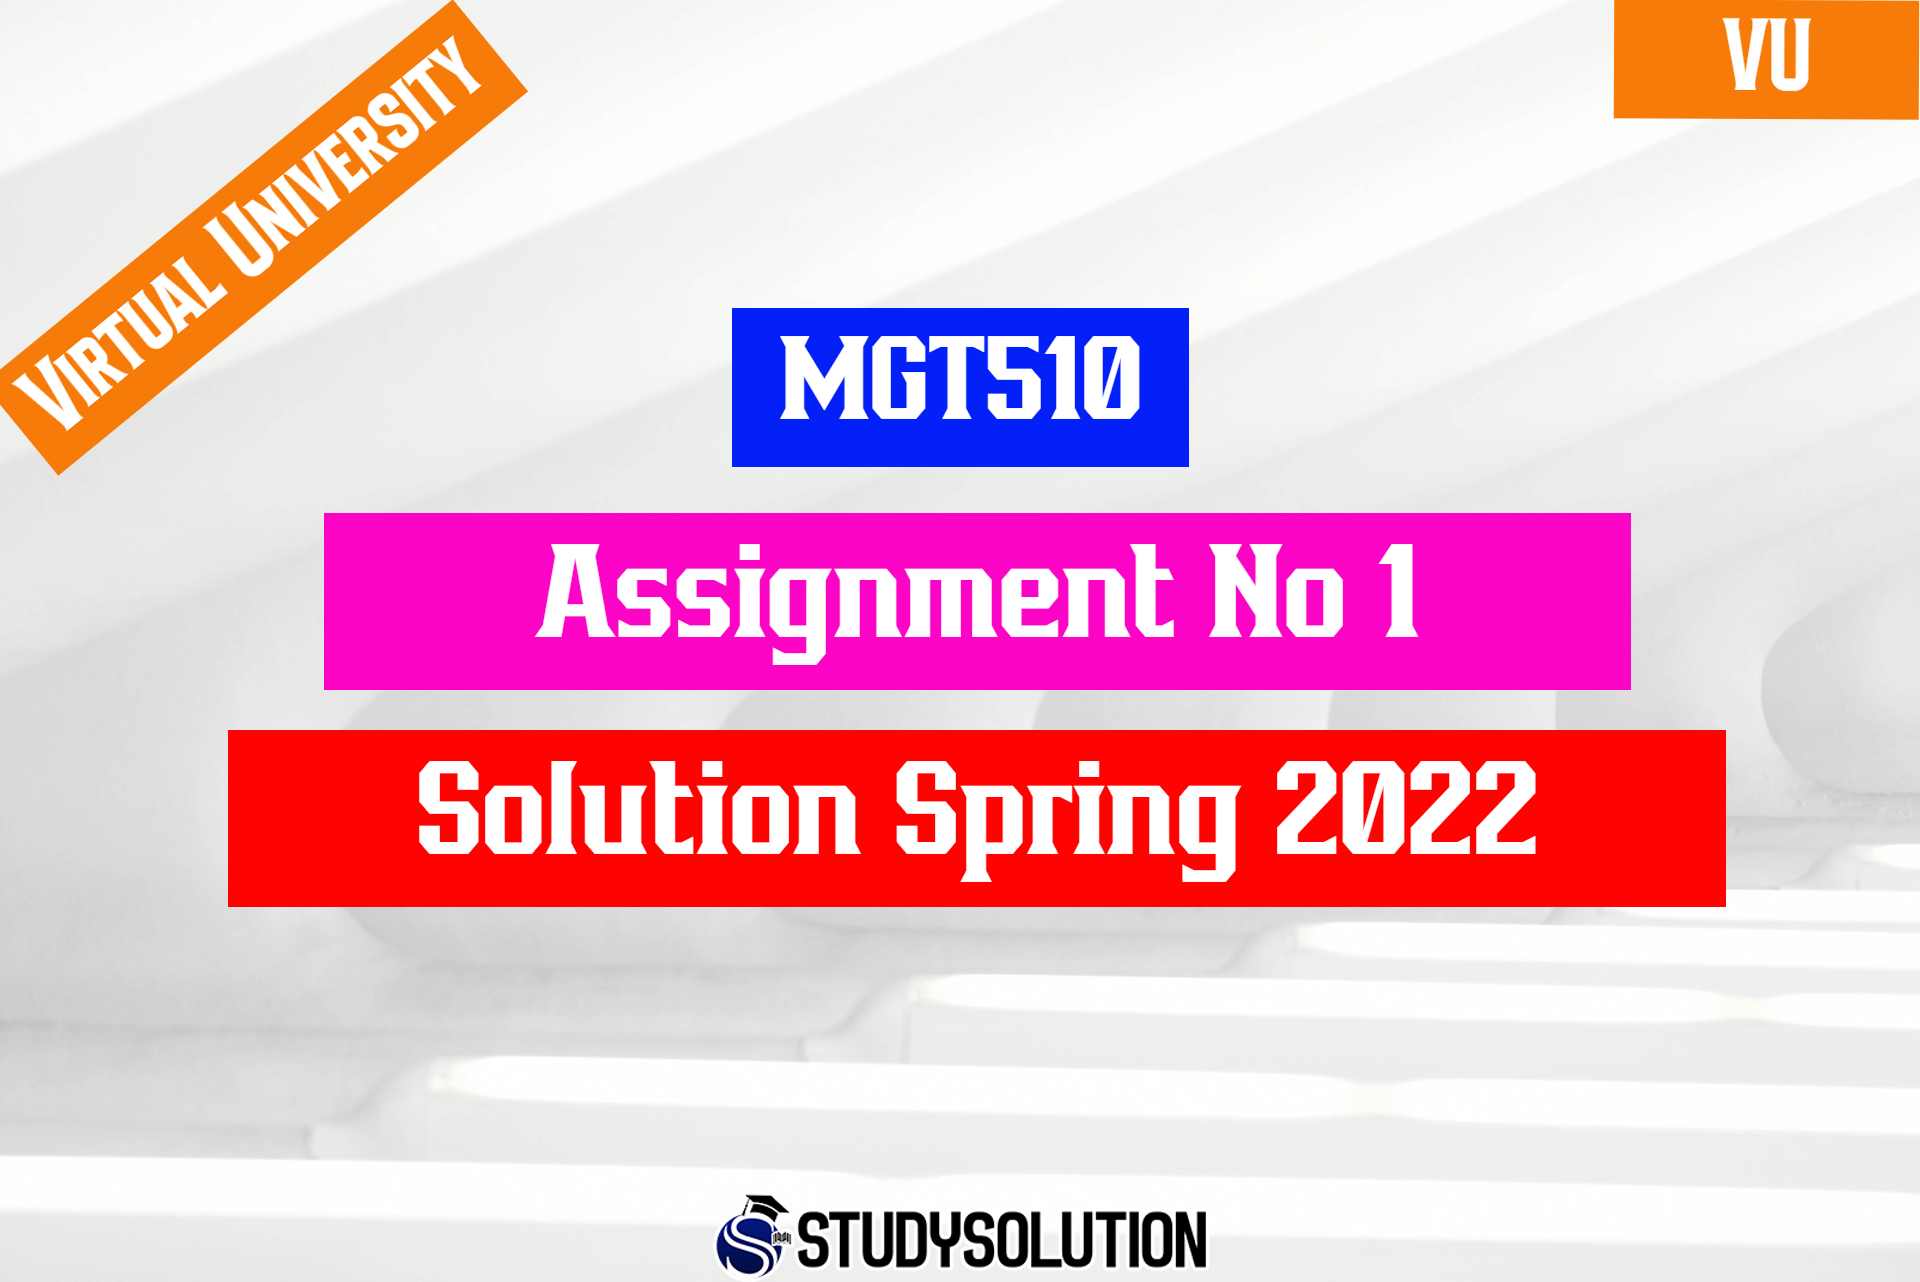 MGT510 Assignment No 1 Solution Spring 2022